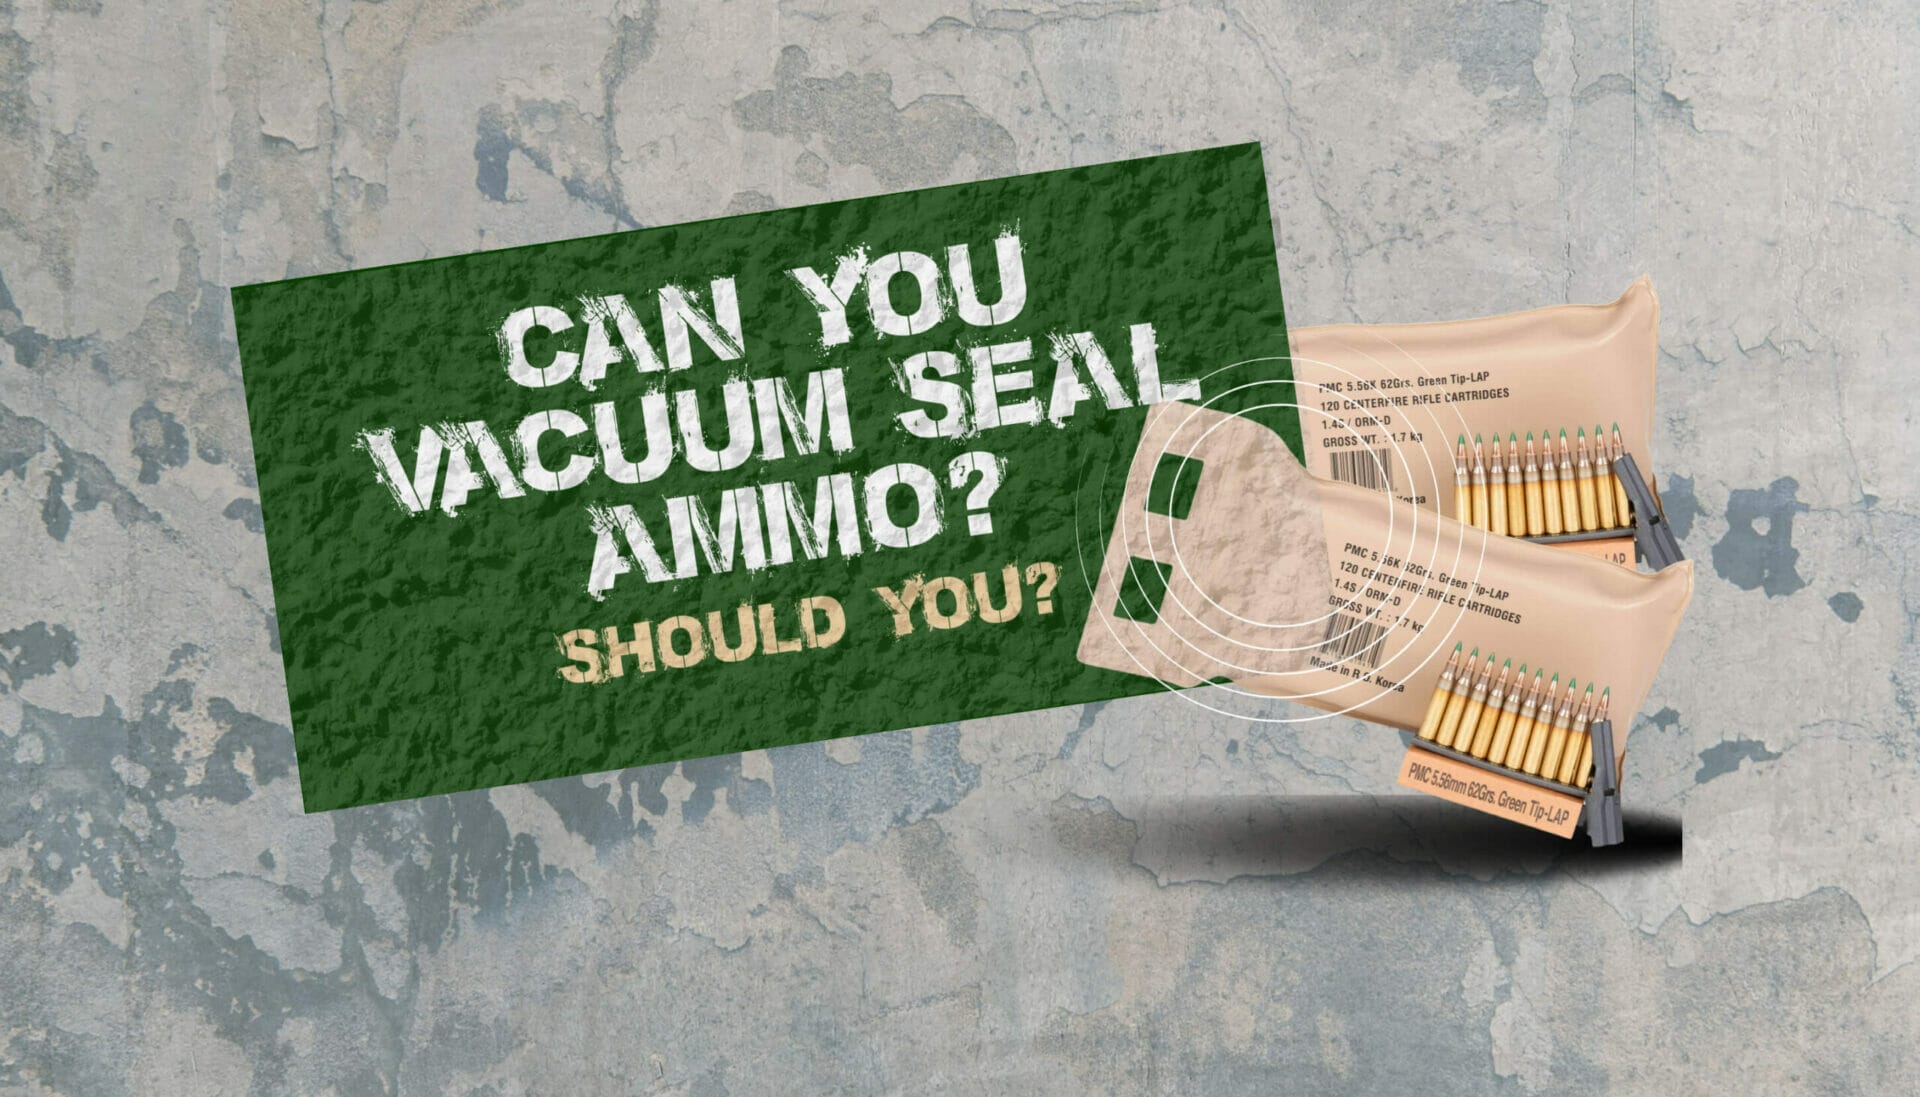 Can You Vacuum Seal Ammo Should You